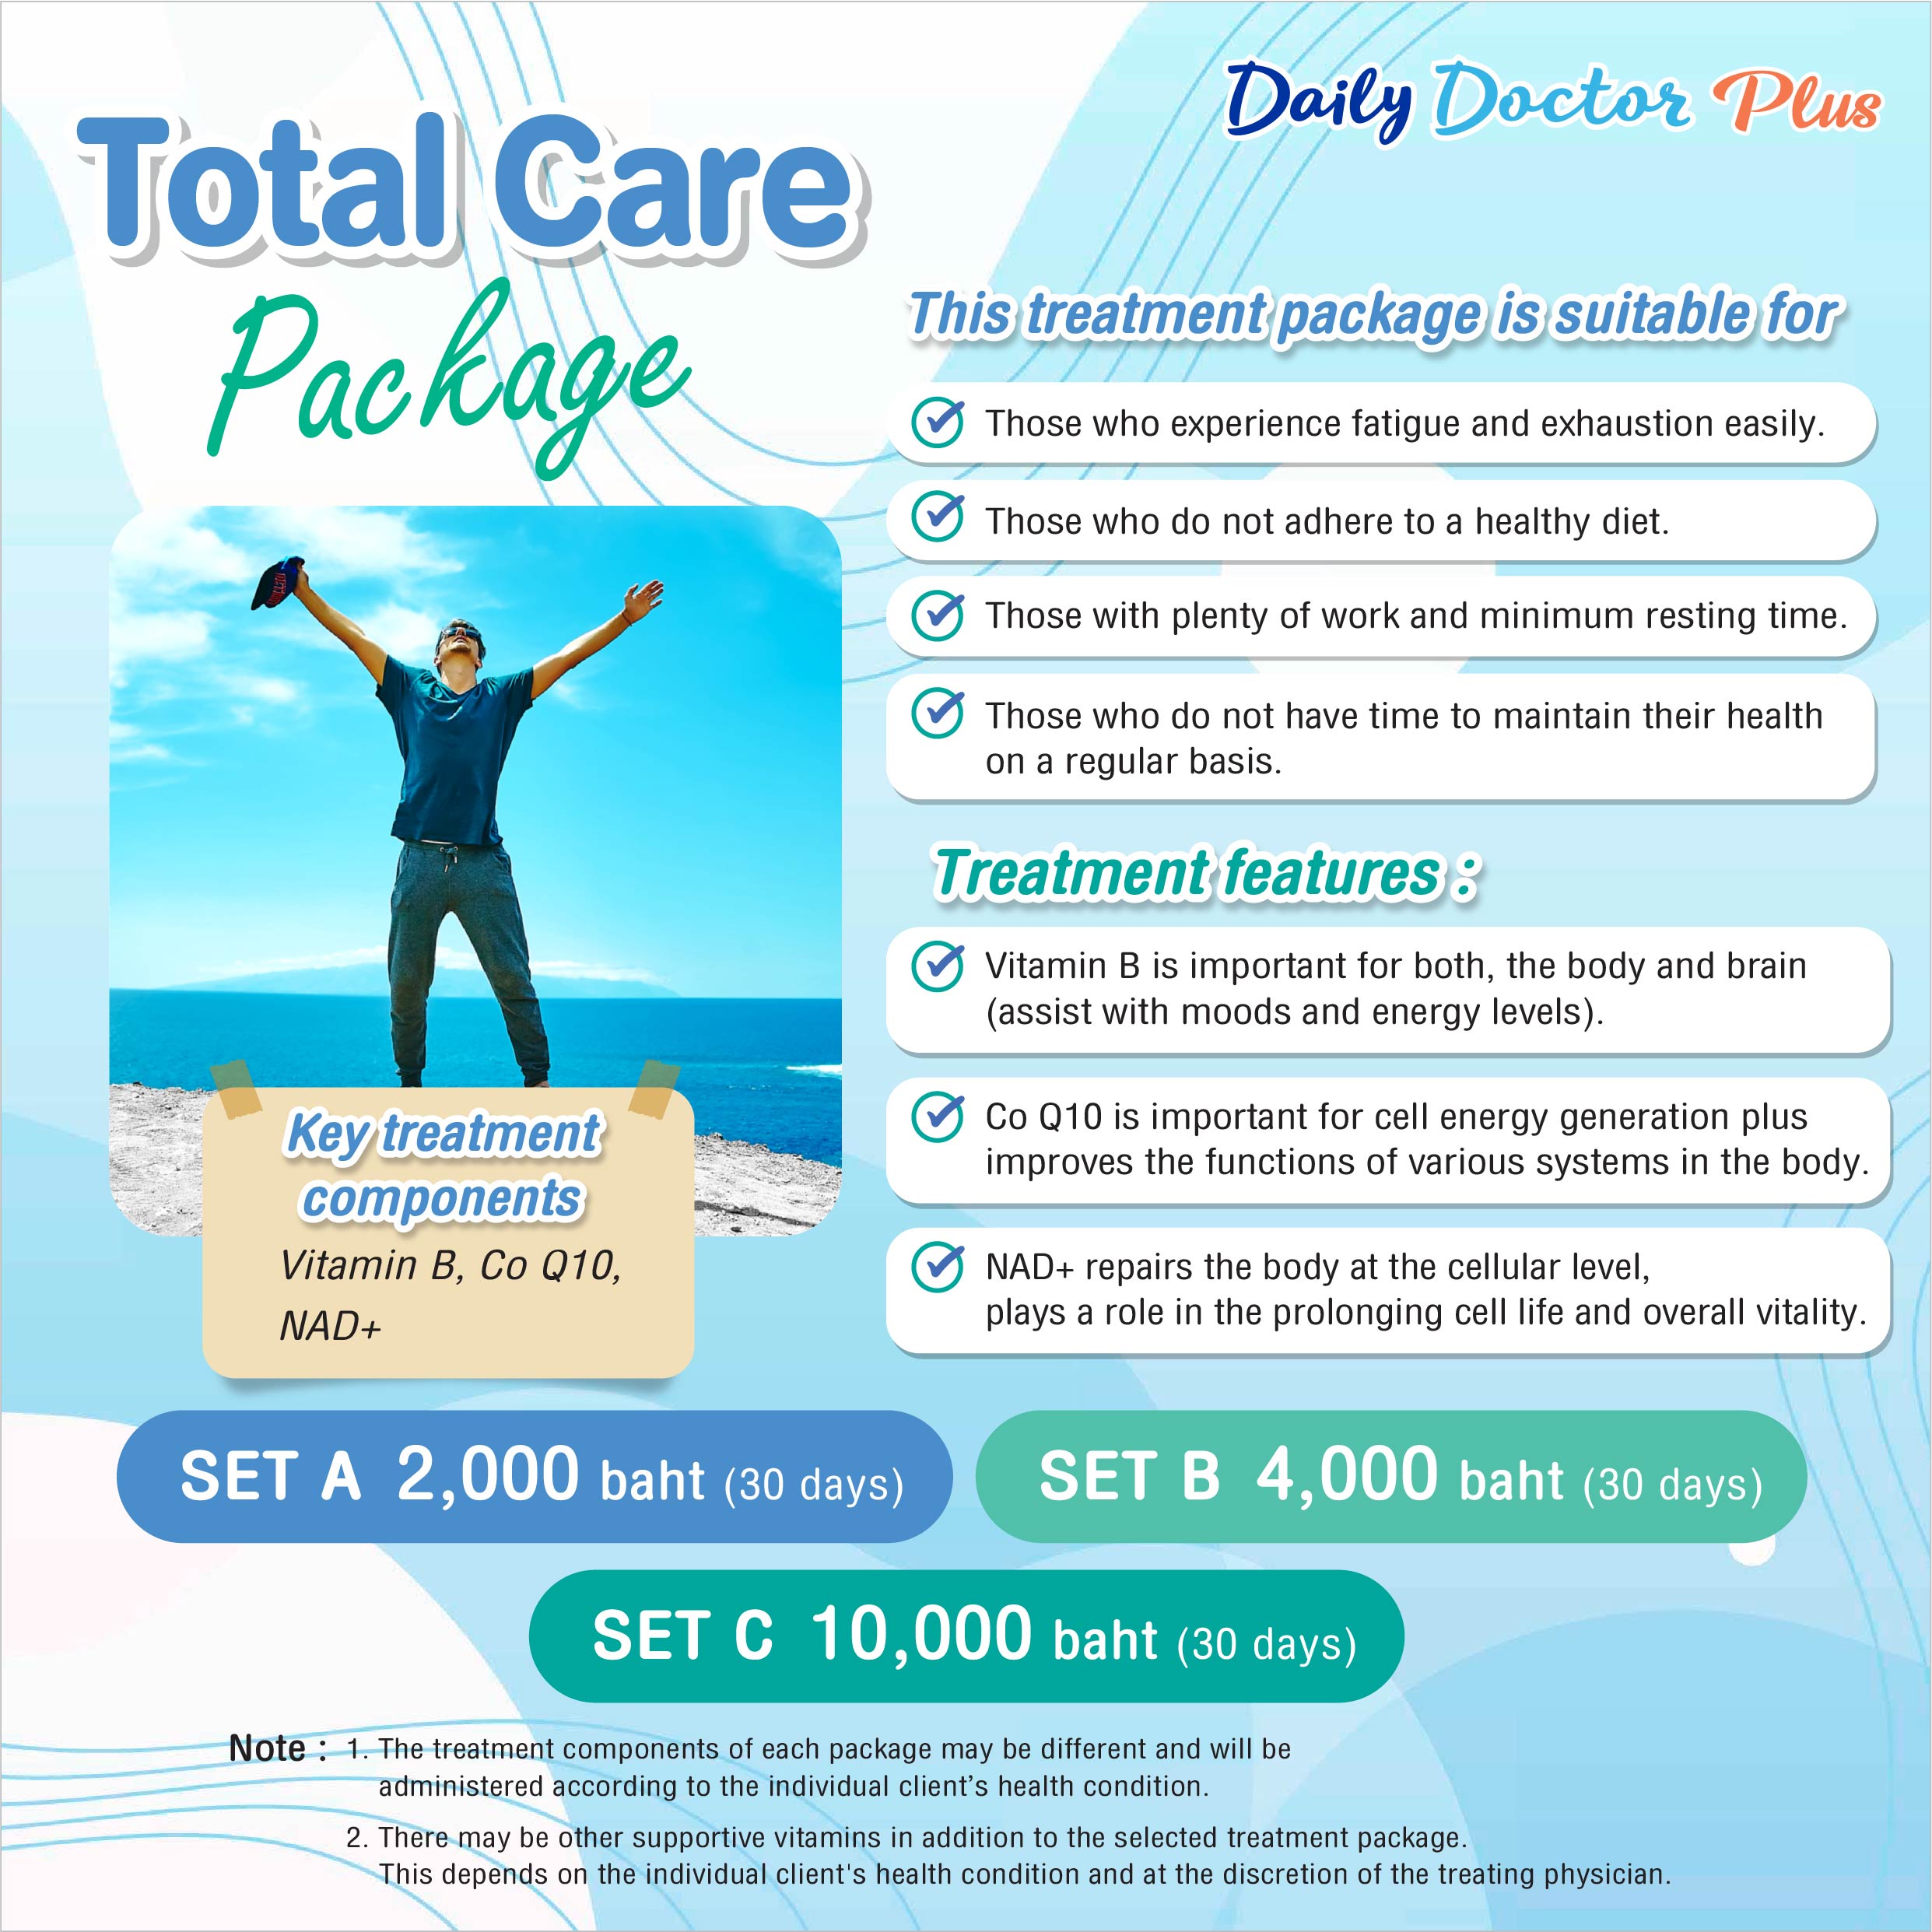 Daily Doctor Plus : Total Care Package